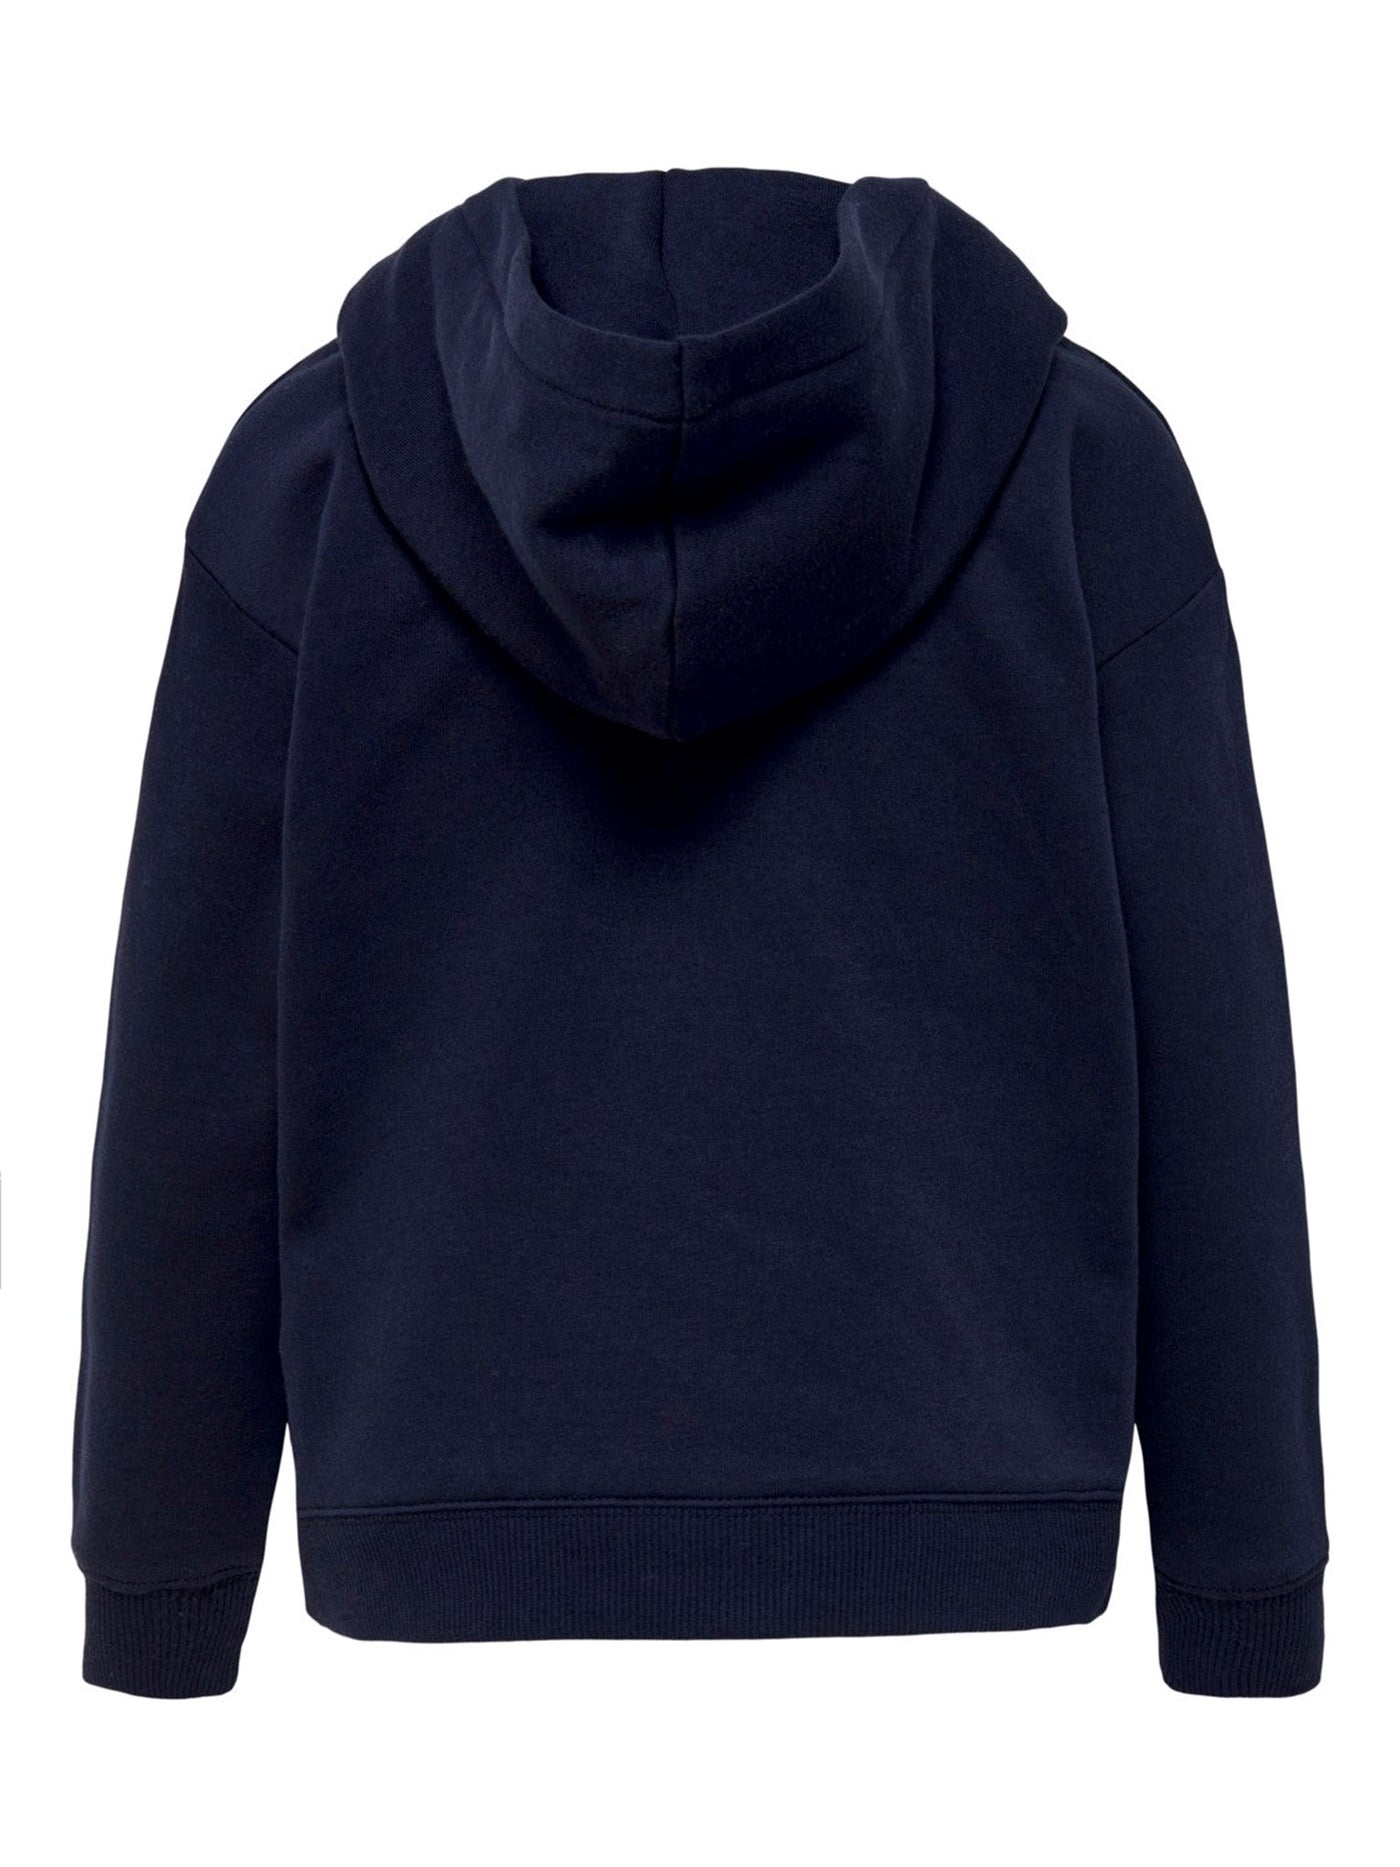 Every Life Small Logo Hoodie - Evening Blue - Kids Only 2